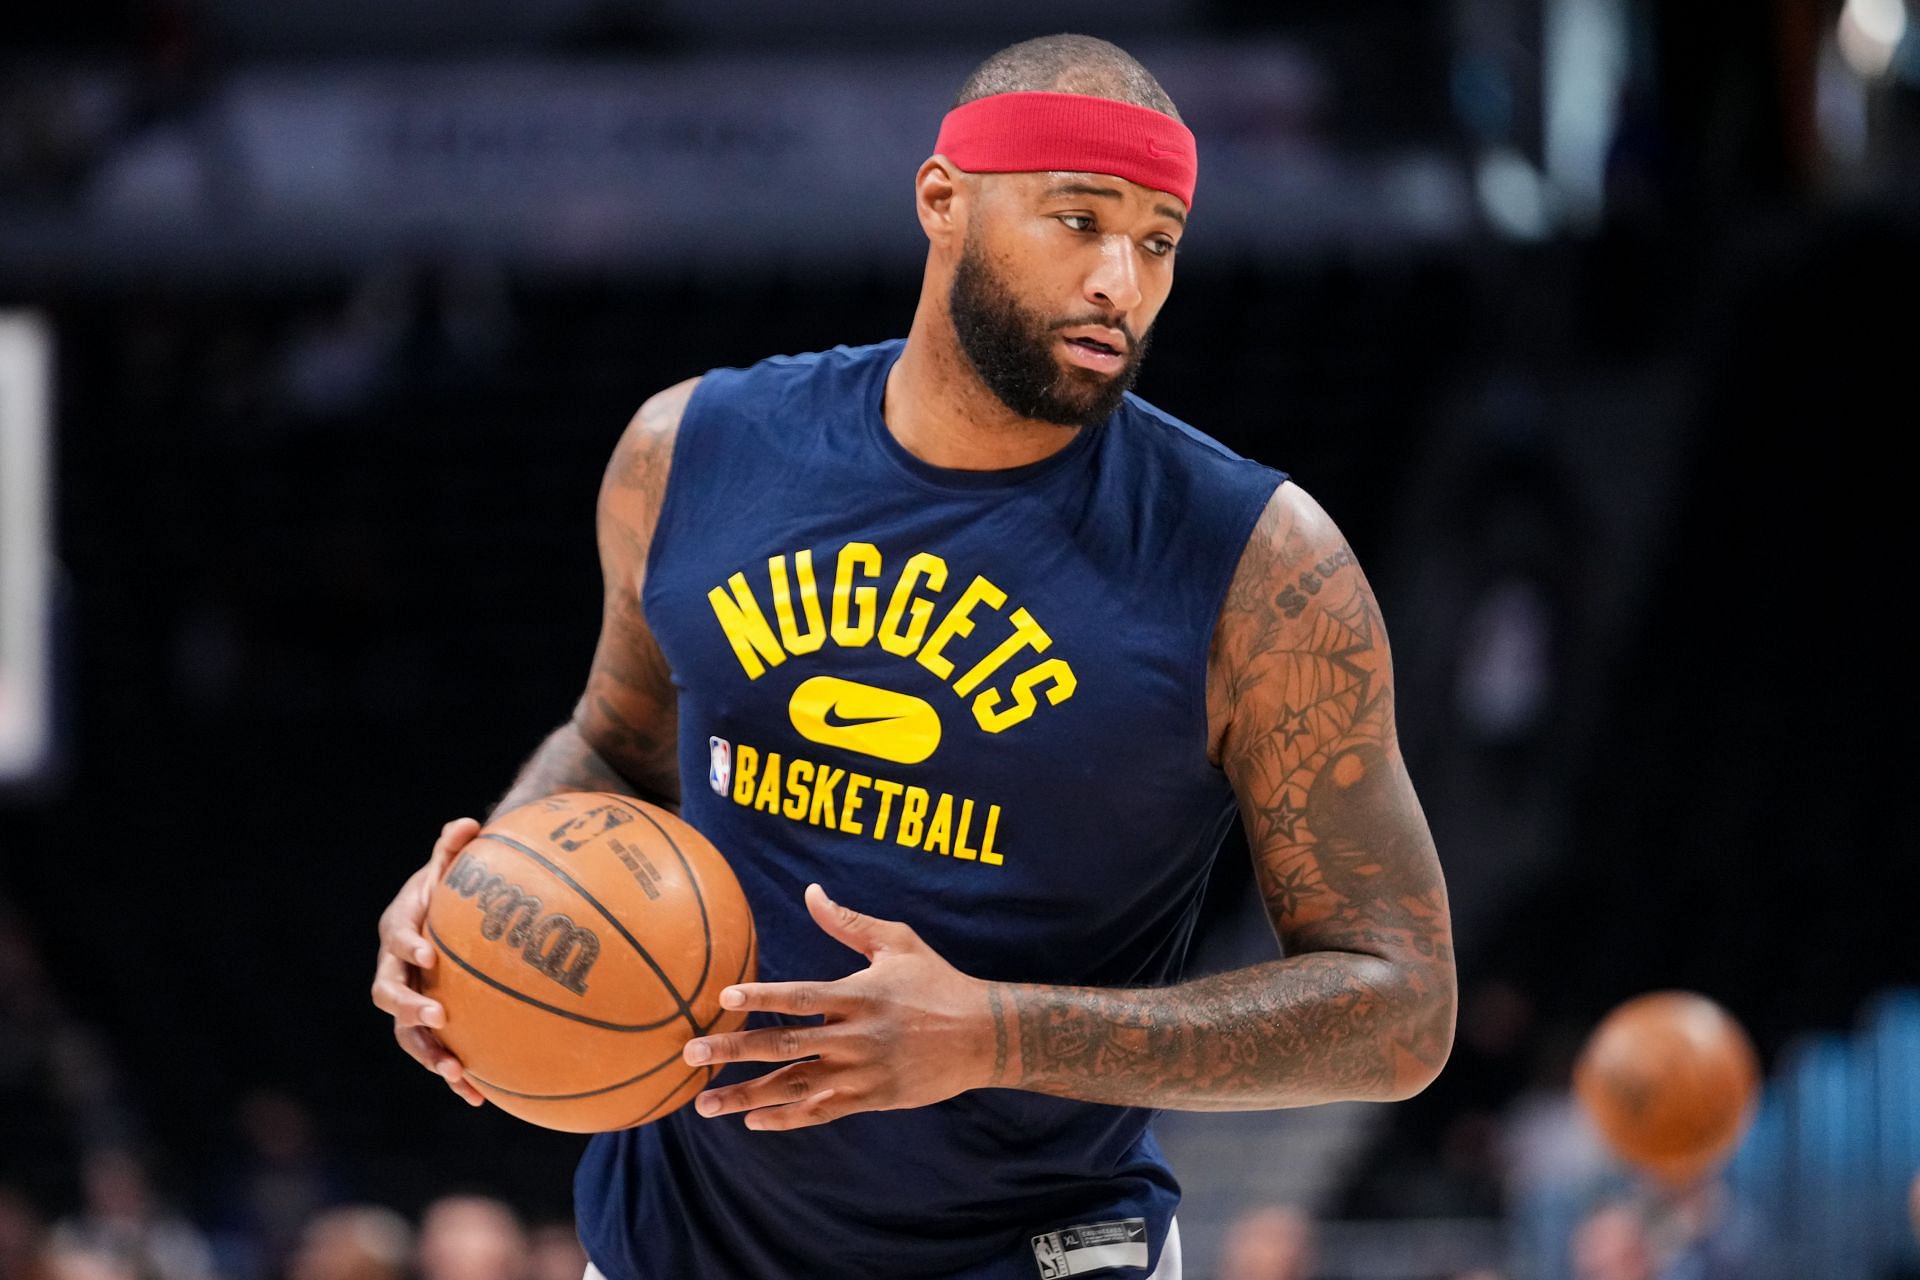 DeMarcus Cousins last played for the Denver Nuggets